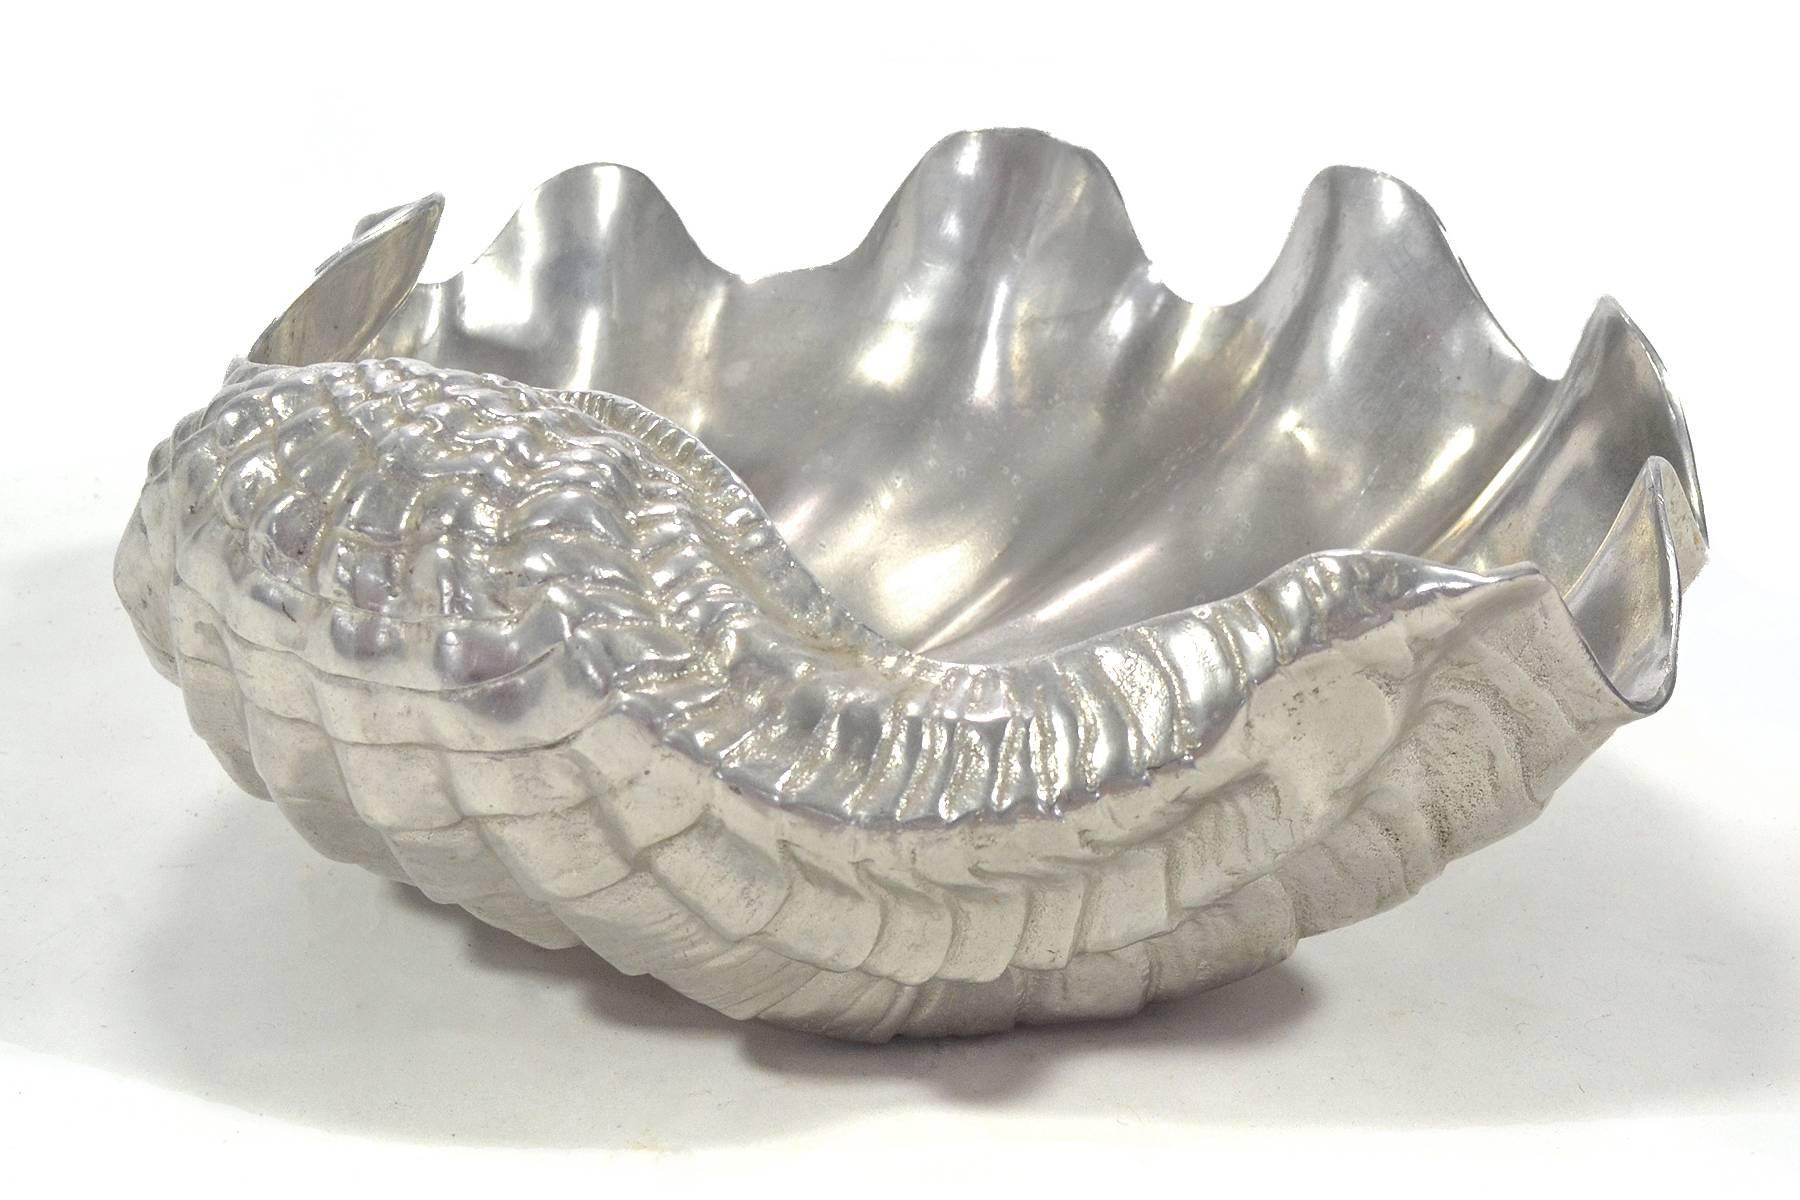 A striking piece by Arthur Court in the form of an extra large clam shell, this piece has great presence. It can serve many purposes from a centerpiece, to a serving bowl, a punch bowl, a soup tureen to our favorite and a champagne bucket. This